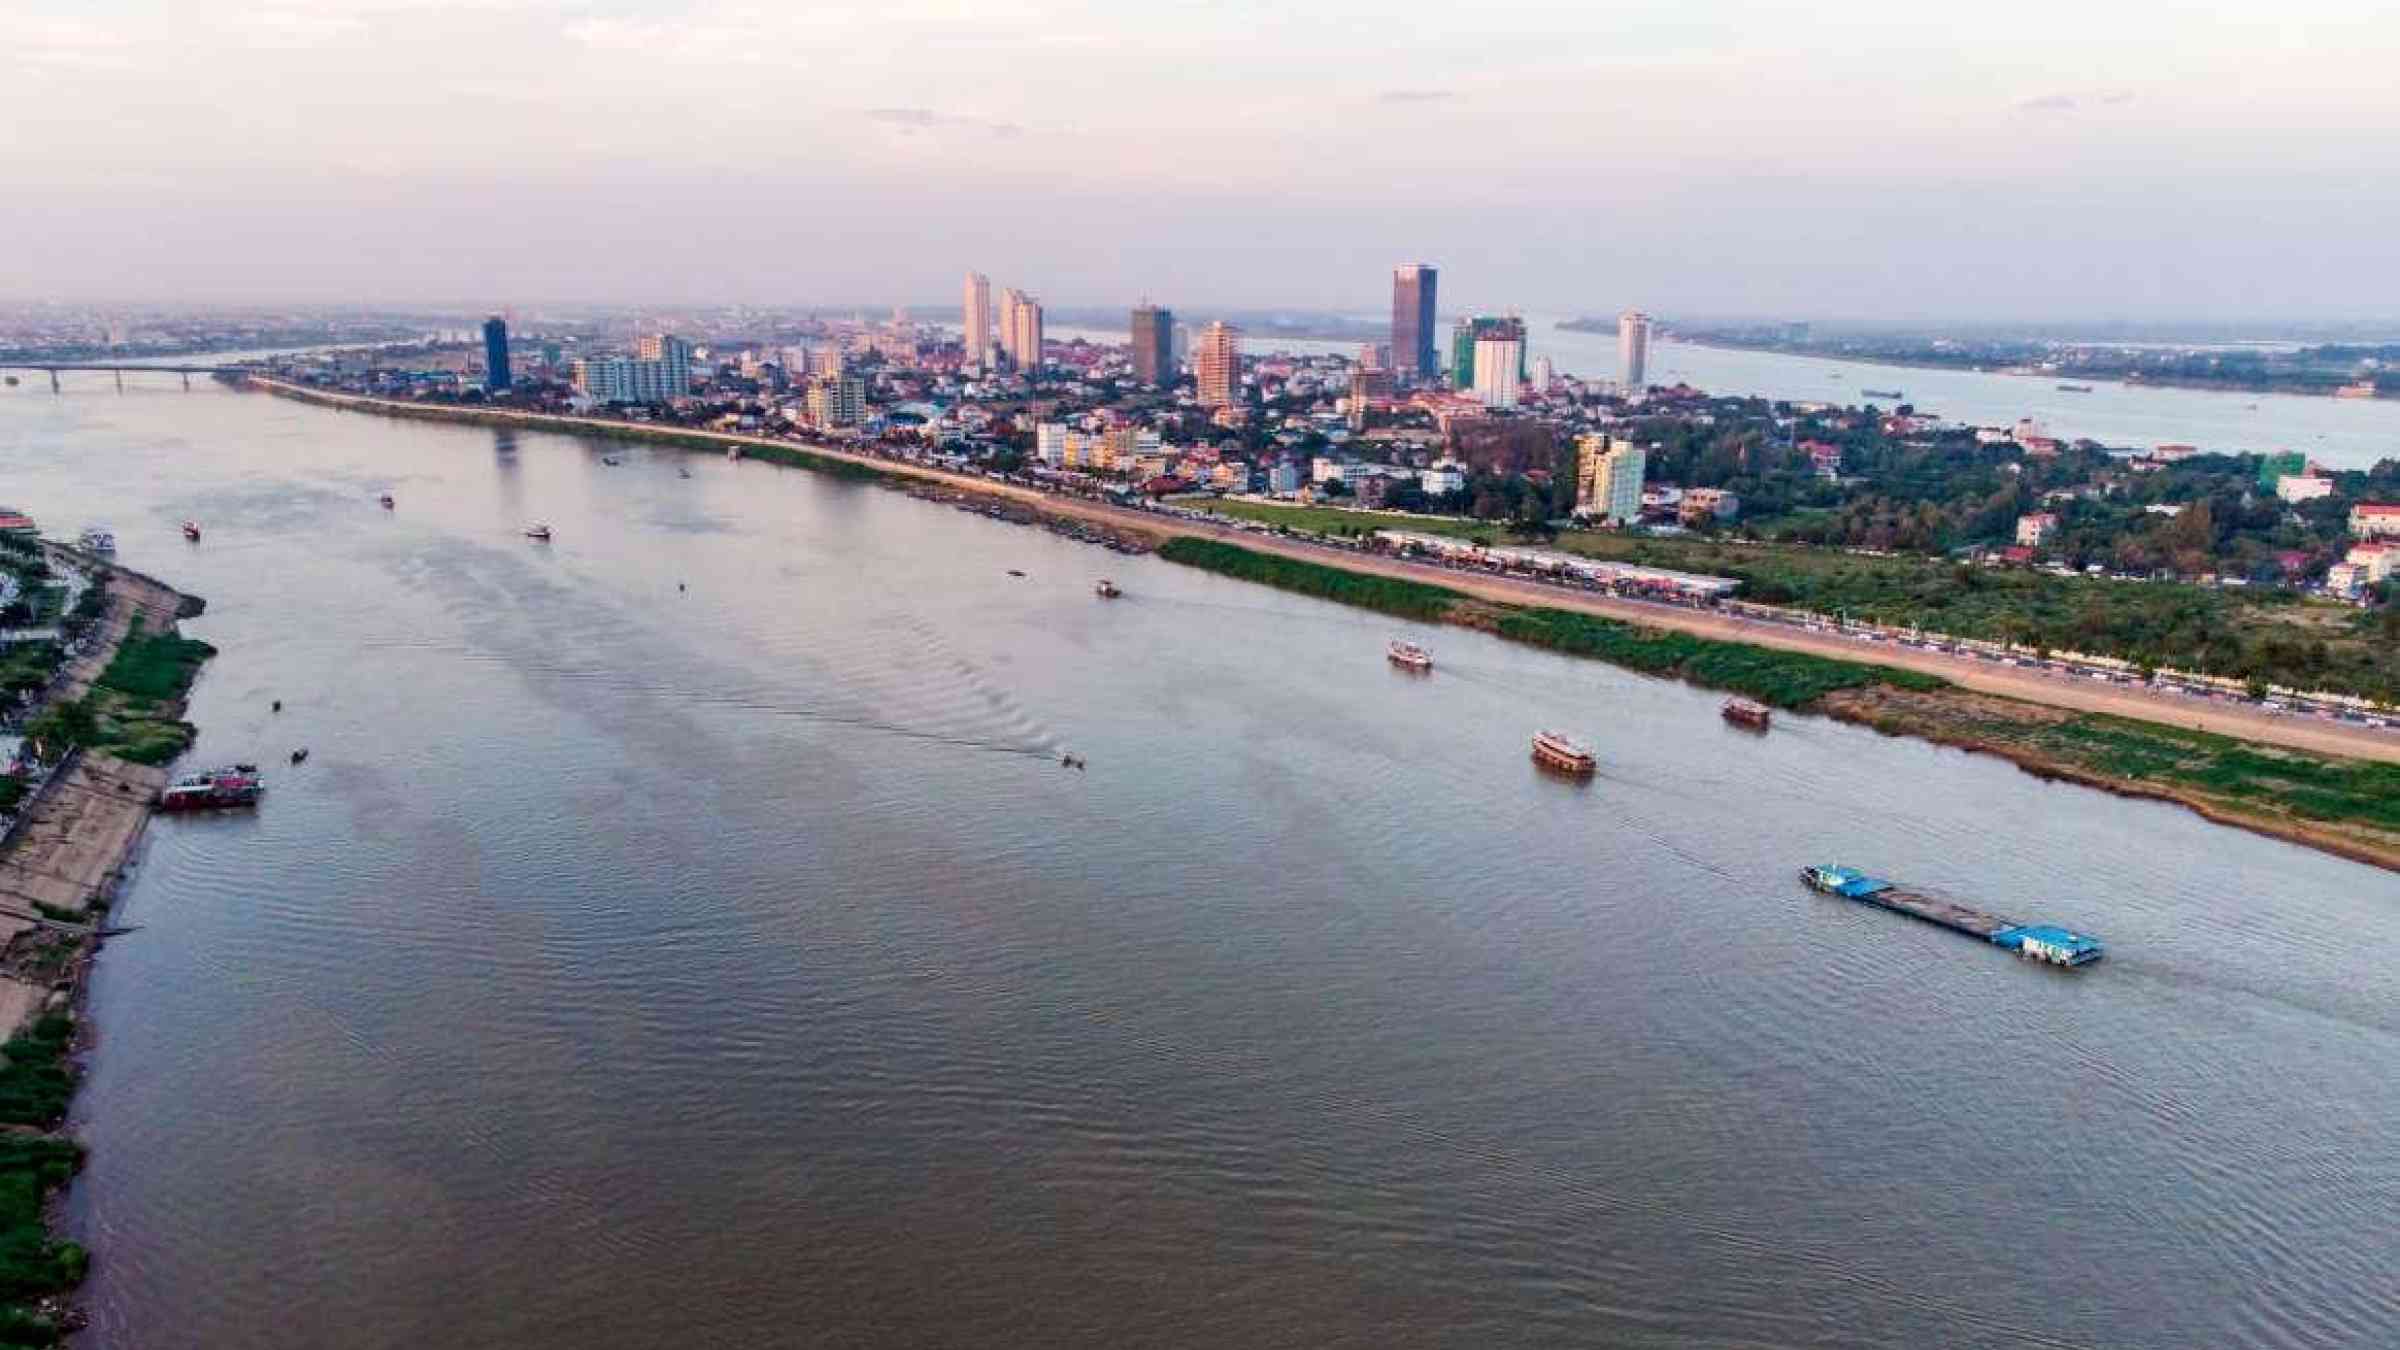 Phnom Penh, situated on the banks of the Tonle Sap, Mekong and Bassac rivers, is highly vulnerable to floods